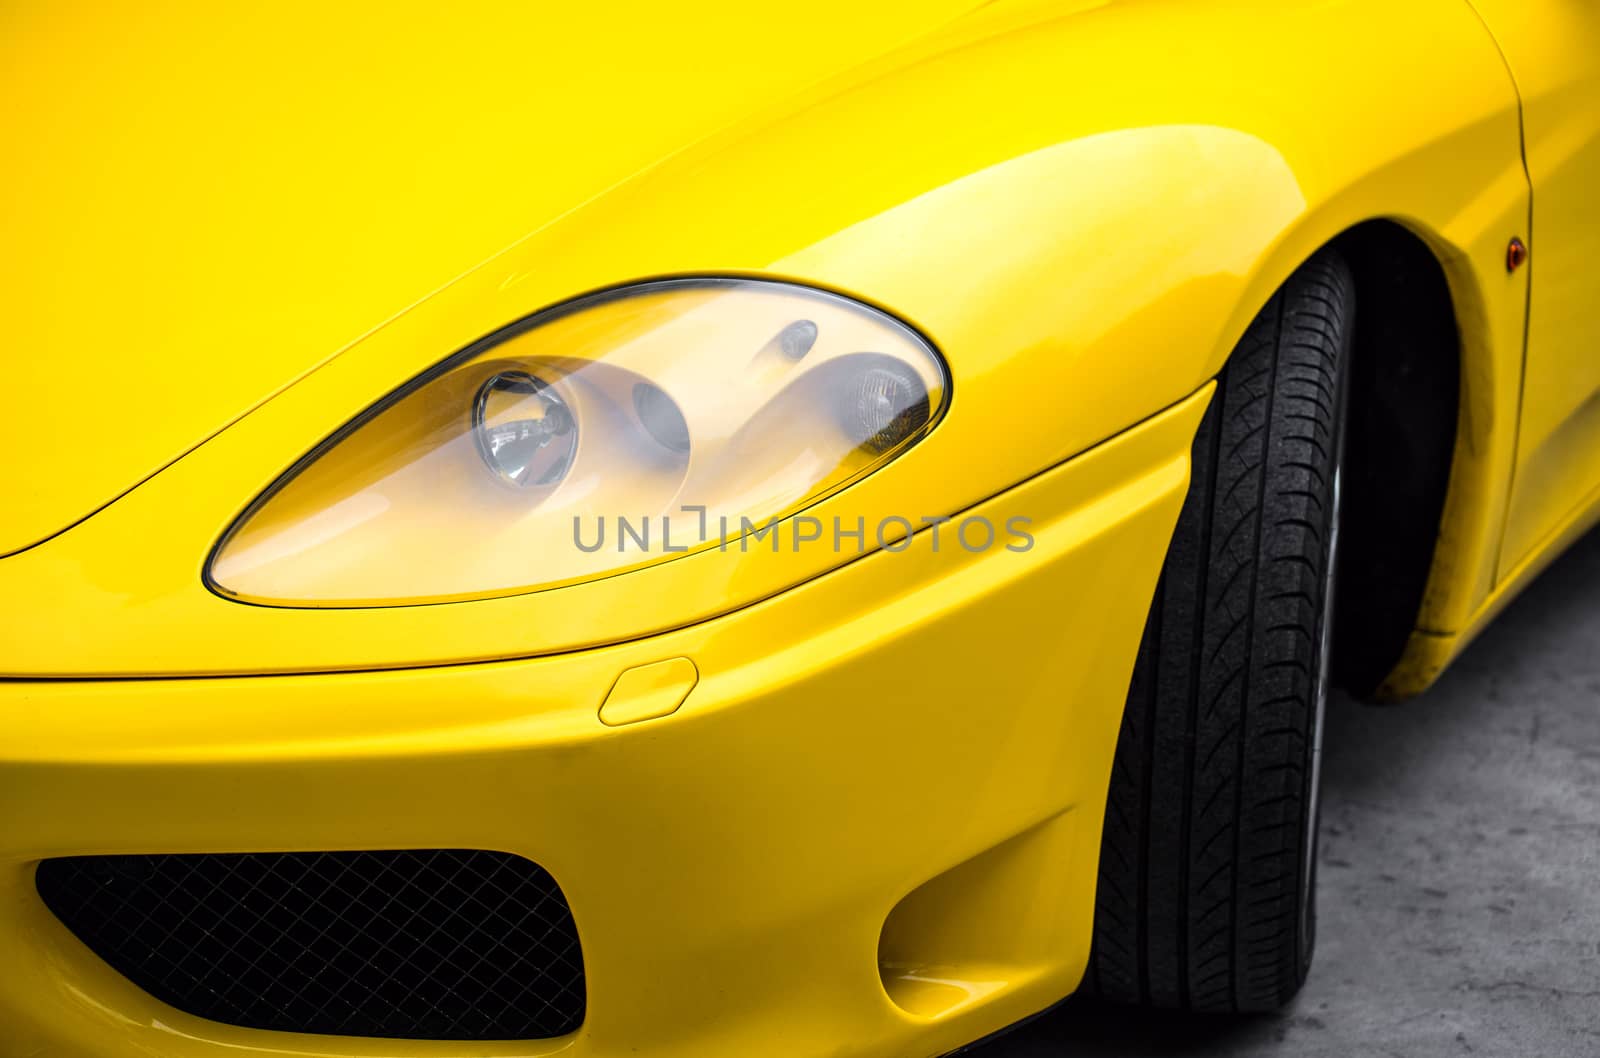 Close-up view of yellow sports car headlight.